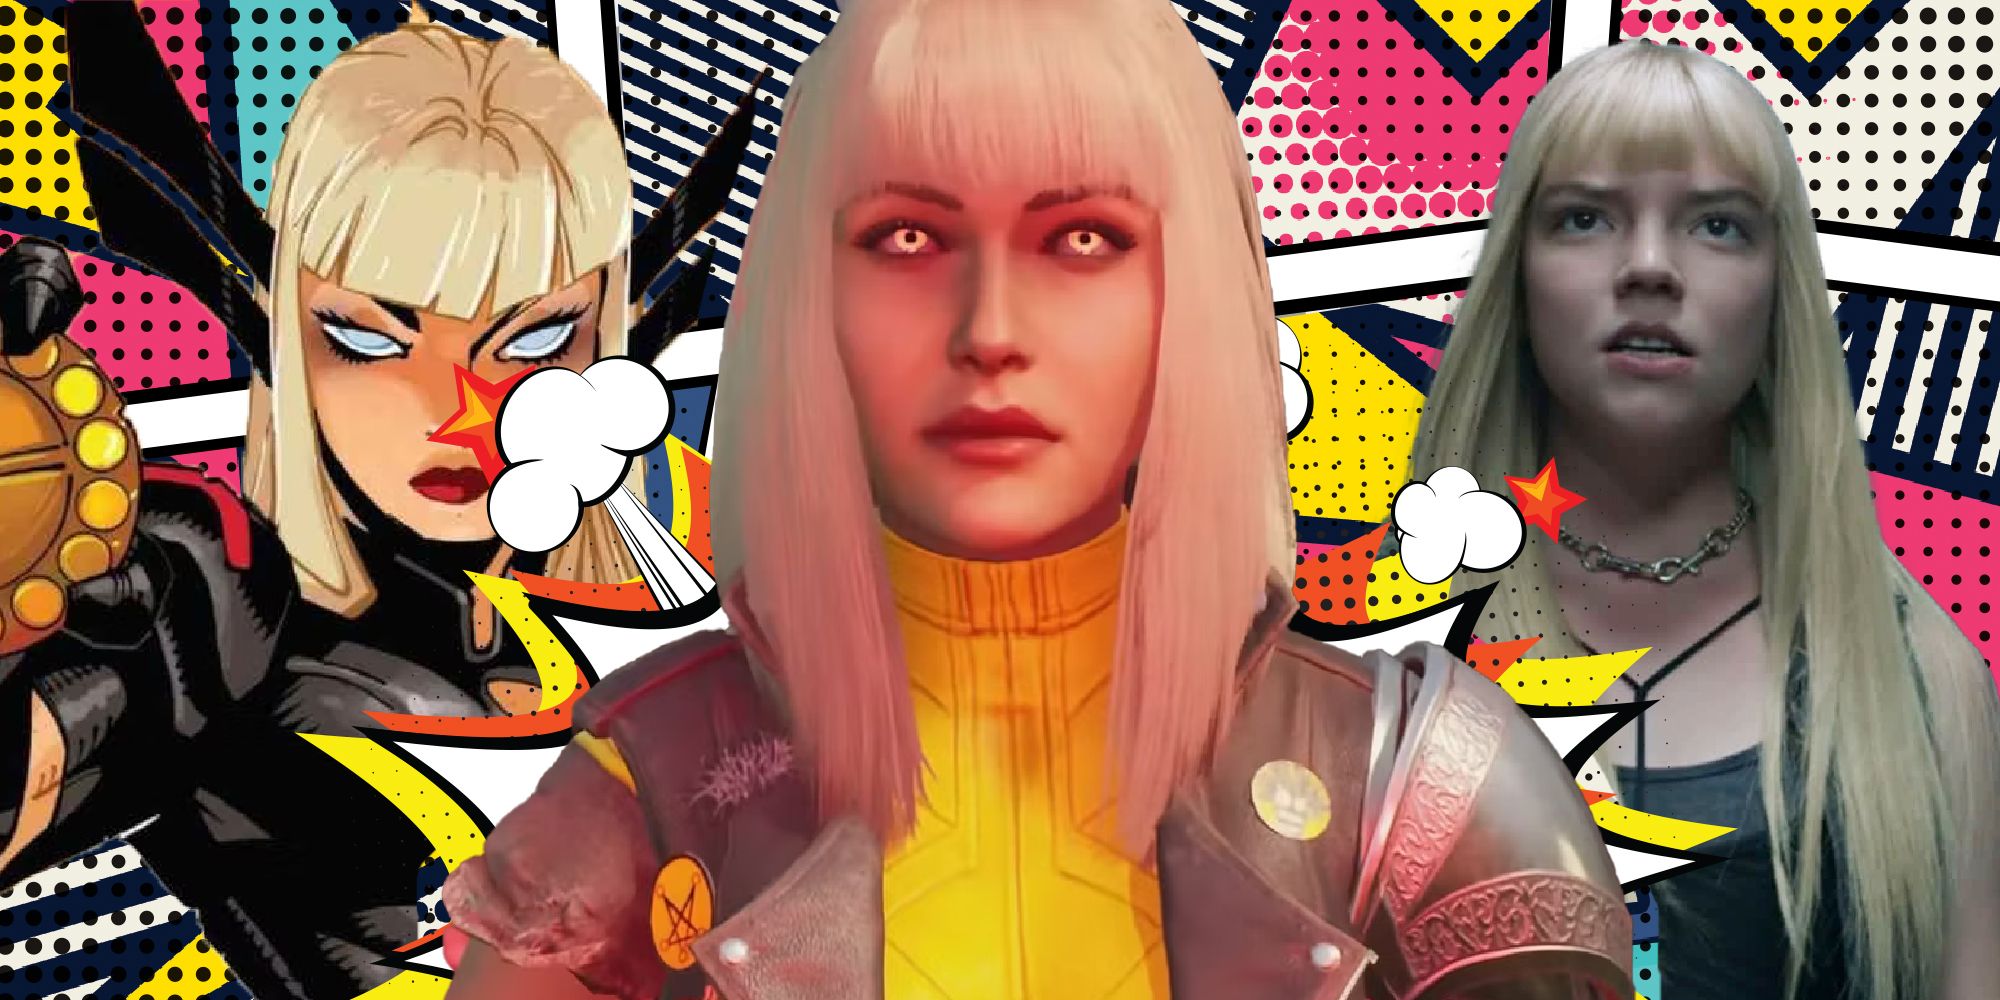 Custom Image - Magik from the Comics, Midnight Suns, and the New Mutants played by Anya Taylor-Joy